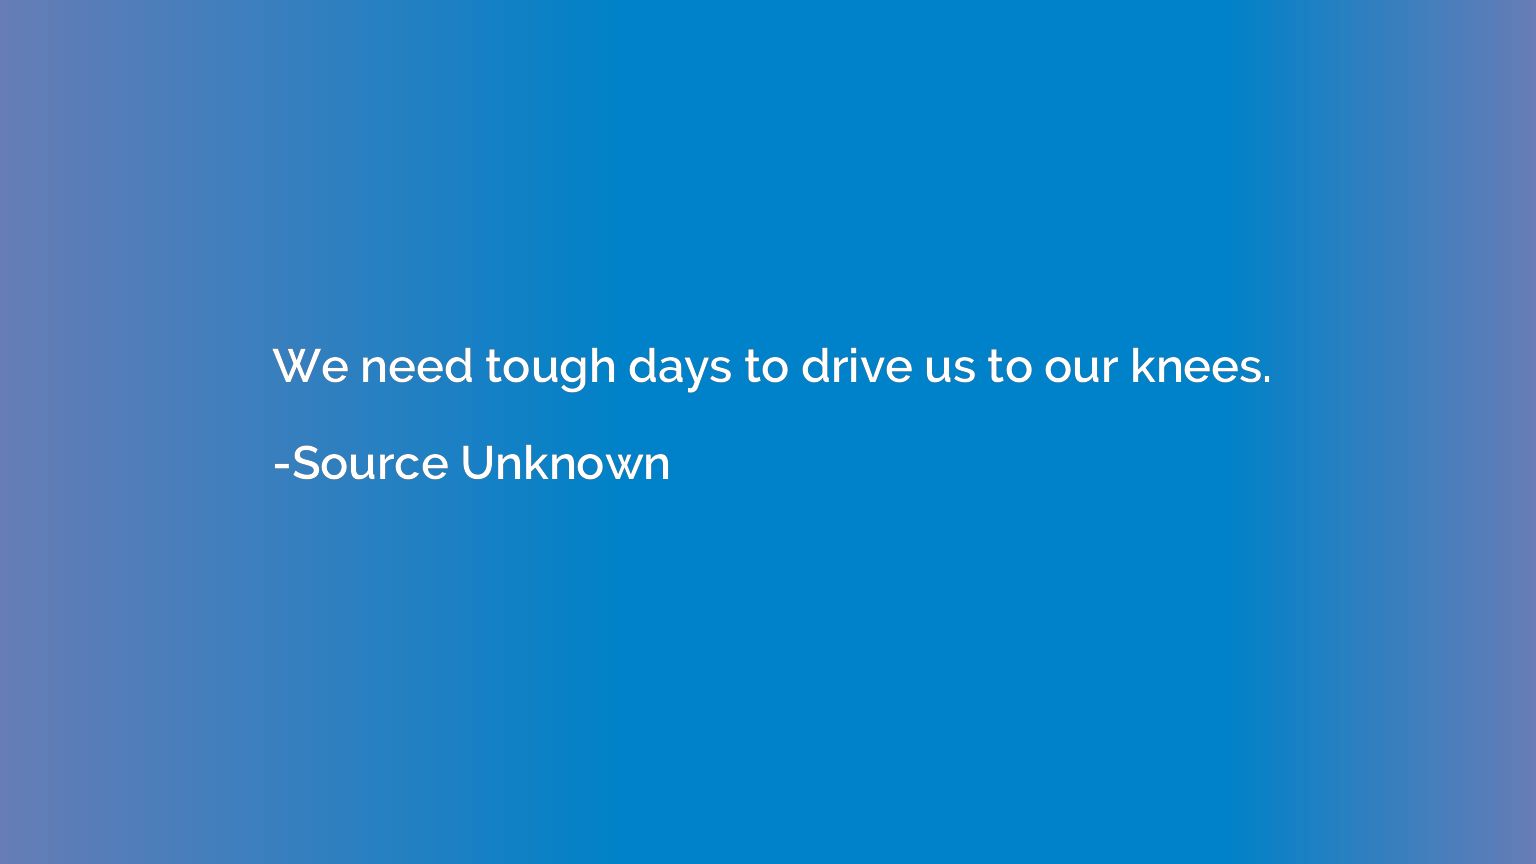 We need tough days to drive us to our knees.